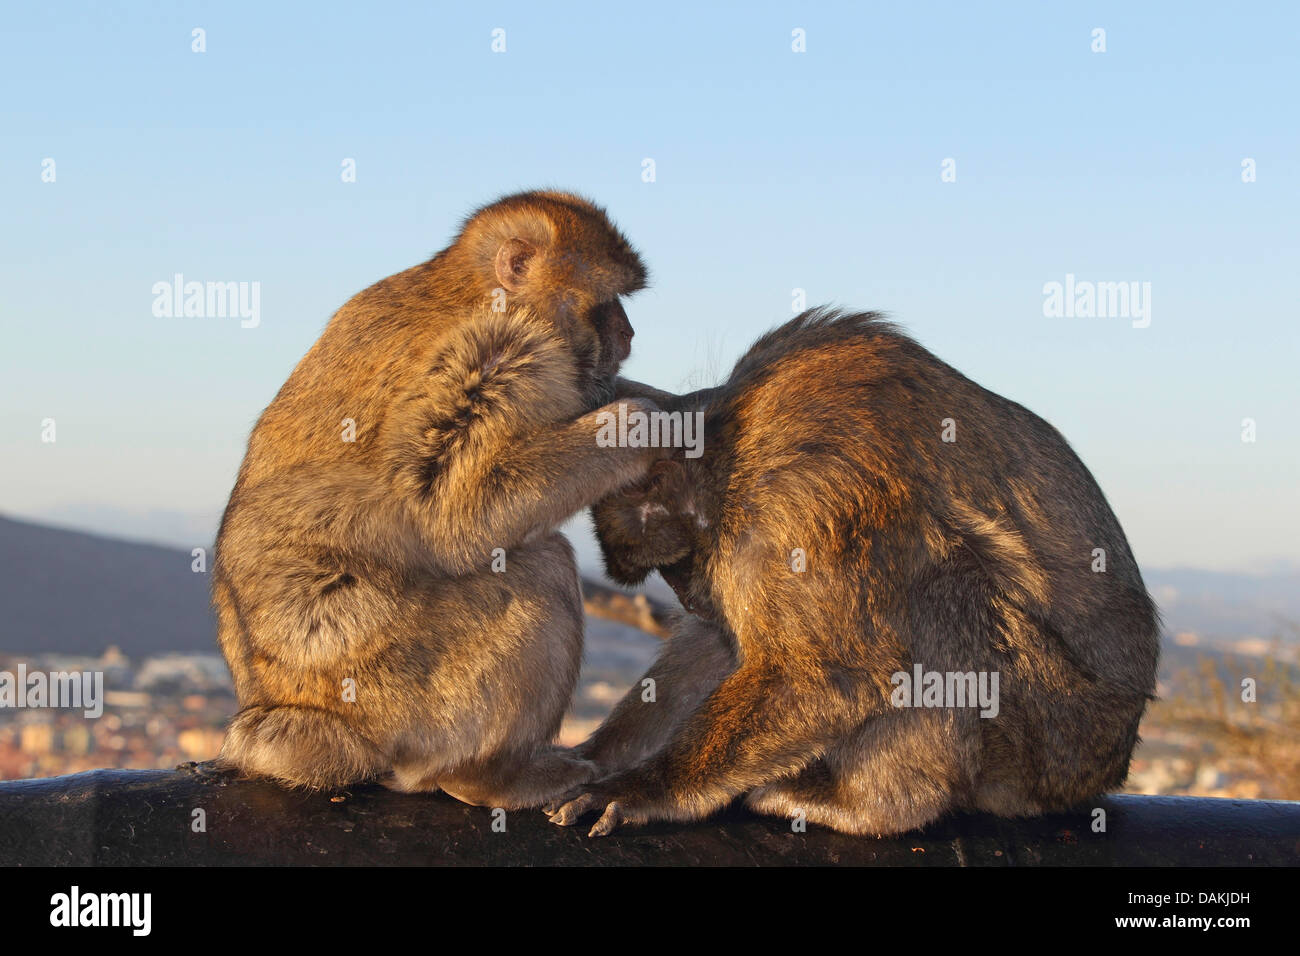 barbary ape, barbary macaque (Macaca sylvanus), sitting opposite and delousing each other, Gibraltar Stock Photo